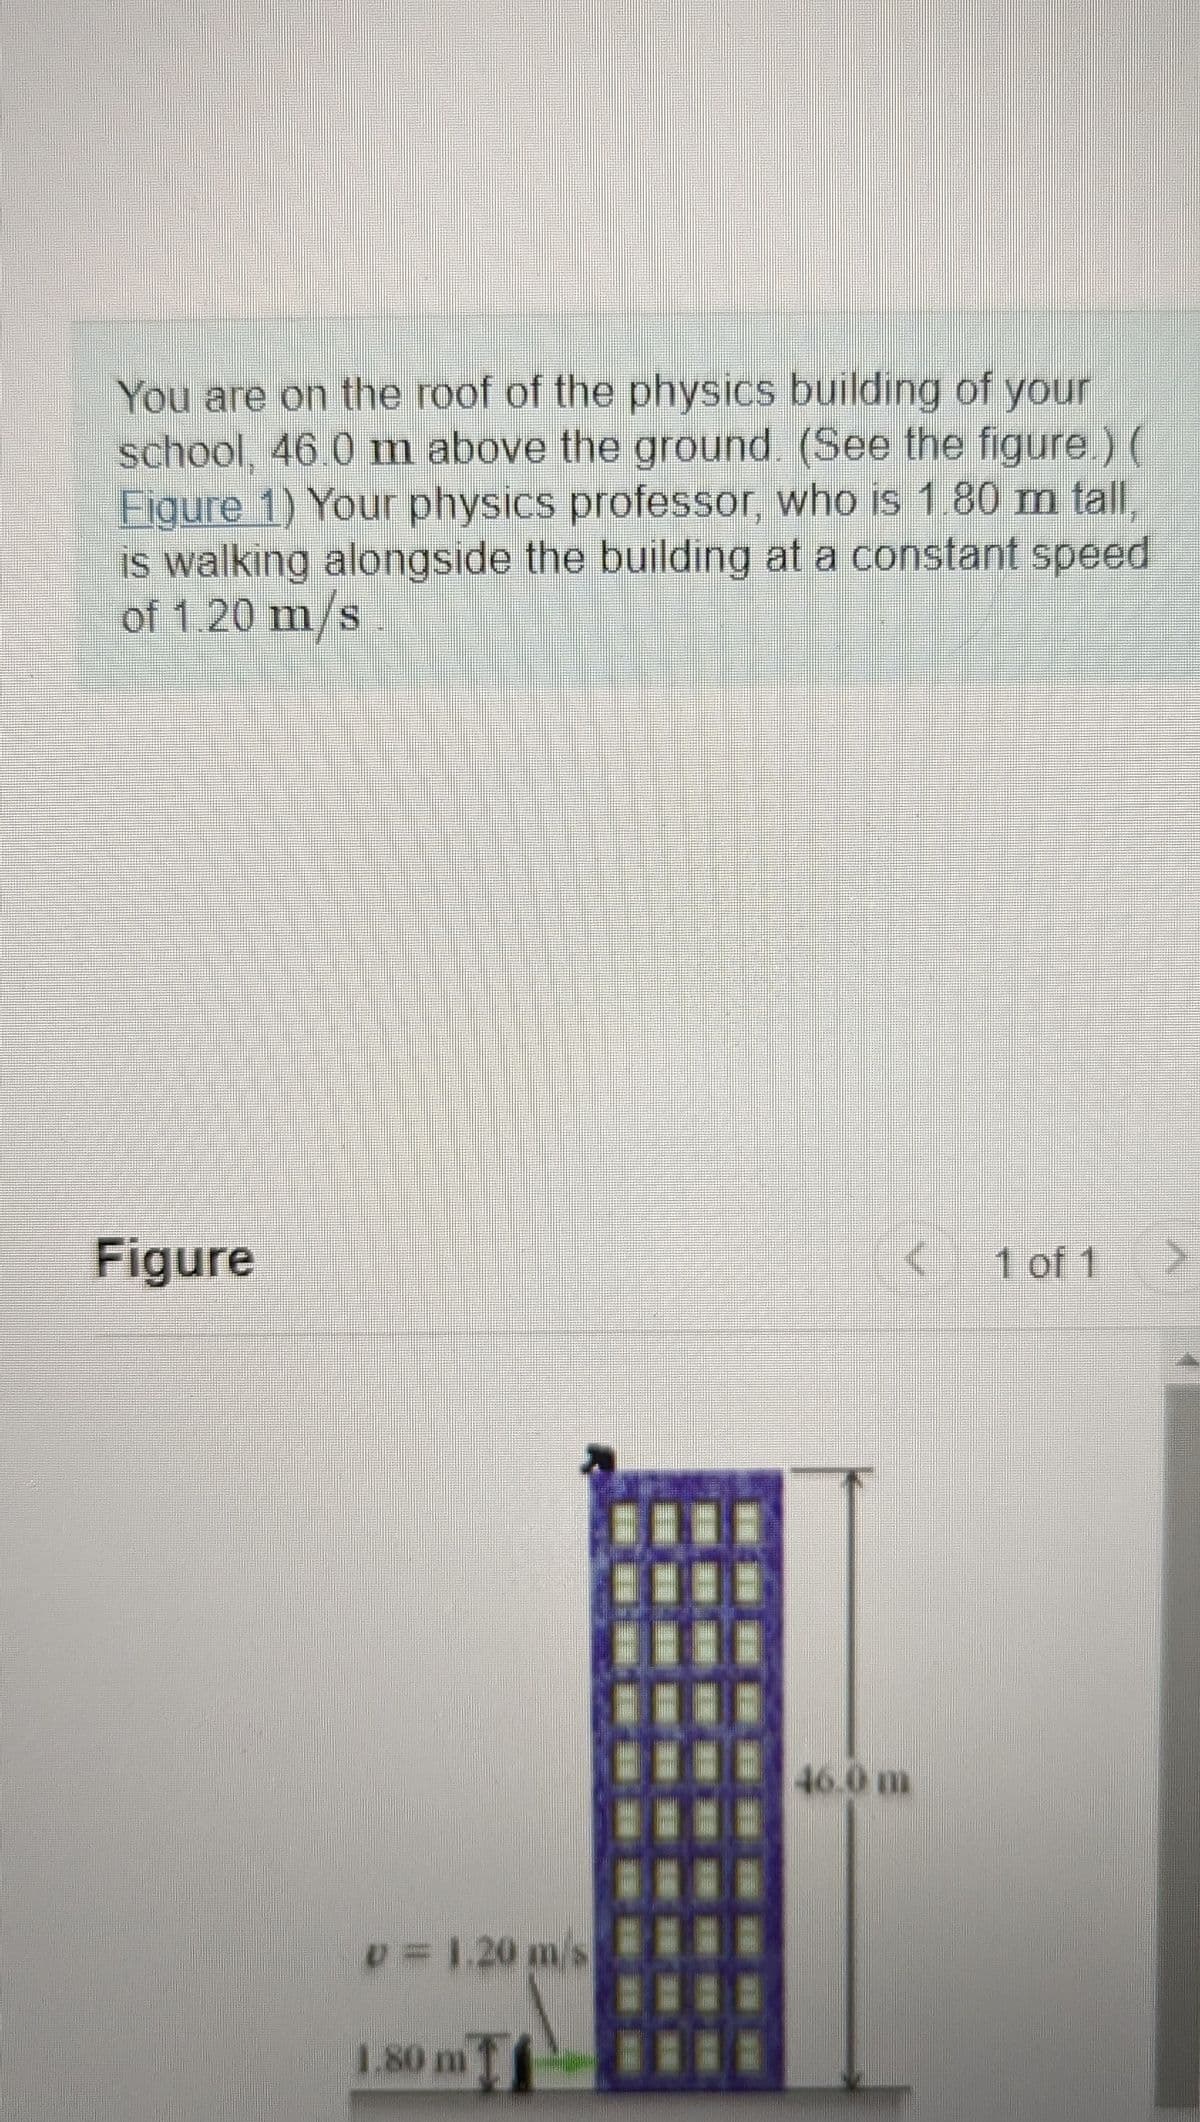 You are on the roof of the physics building of your
school, 46.0 m above the ground. (See the figure.) (
Figure 1) Your physics professor, who is 1.80 m tall,
is walking alongside the building at a constant speed
of 1.20 m/s
Figure
v = 1.20 m s
1.80 m
46.0 m
1 of 1